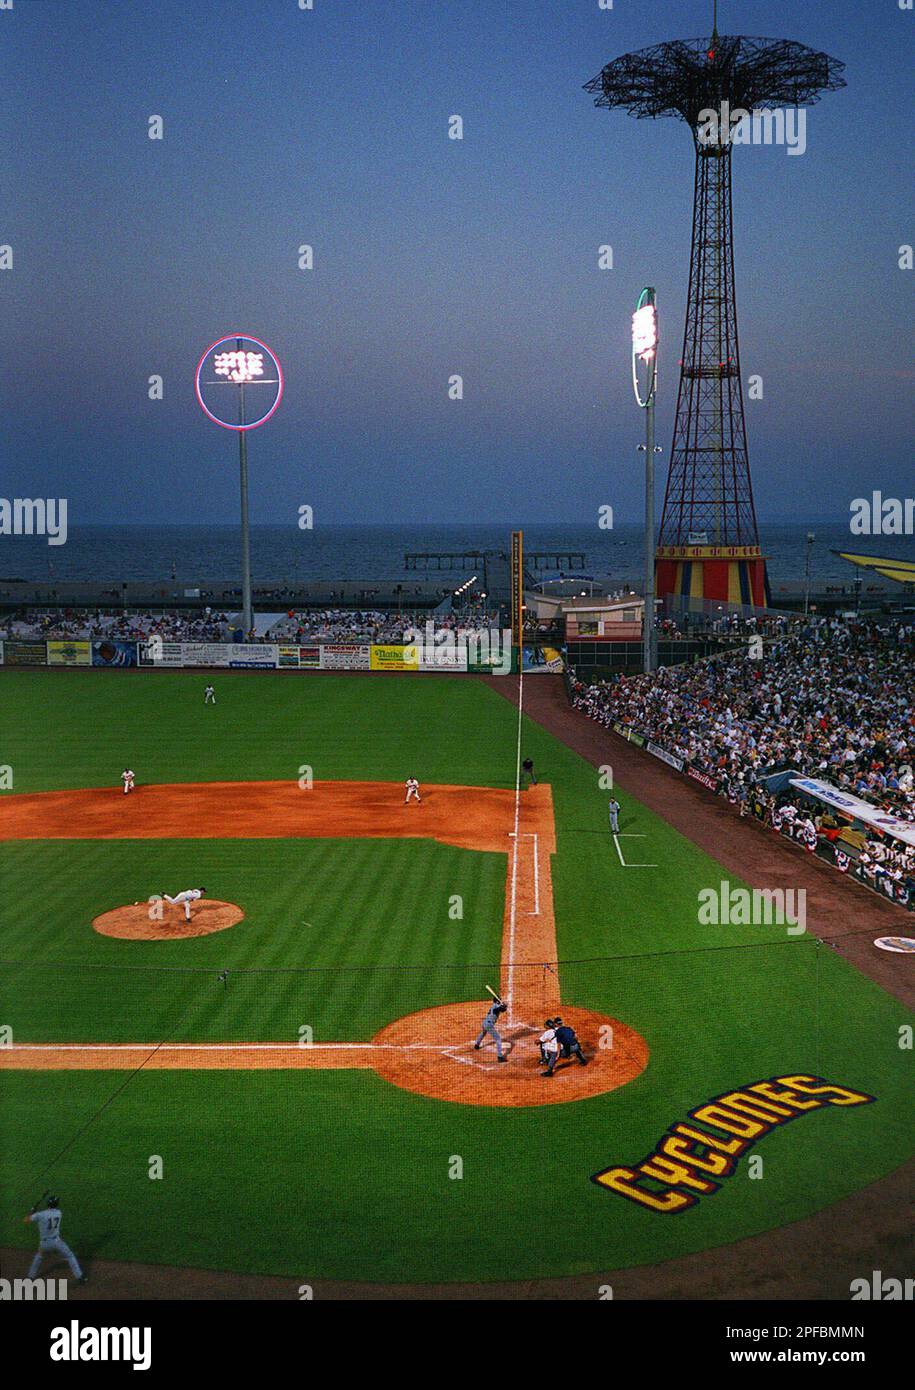 Brooklyn Cyclones on X: It's Opening Day for the Cyclones and